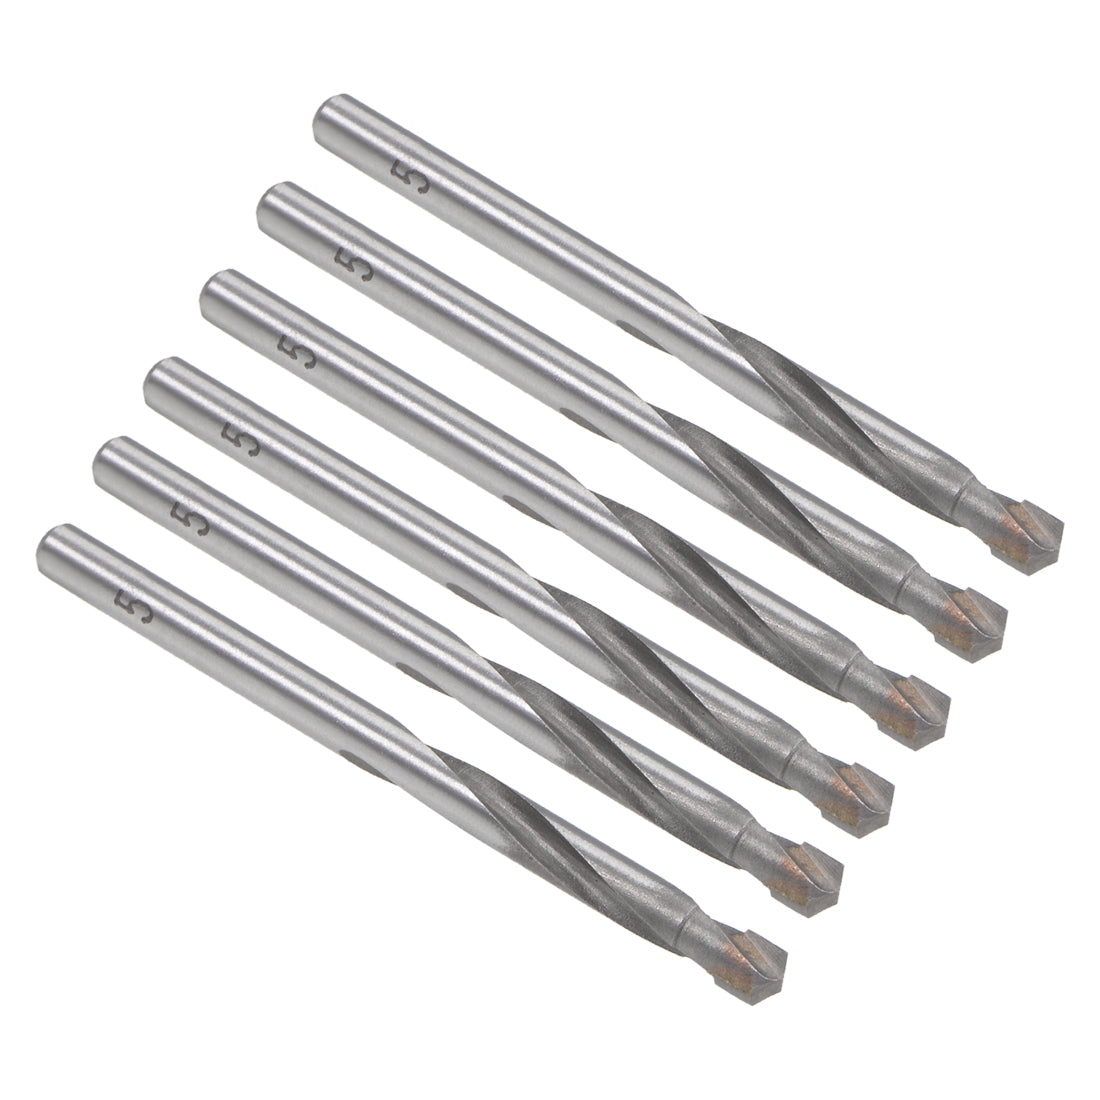 uxcell Uxcell 5mm Cemented Carbide Twist Drill Bits for Stainless Steel Copper Aluminum 6 Pcs